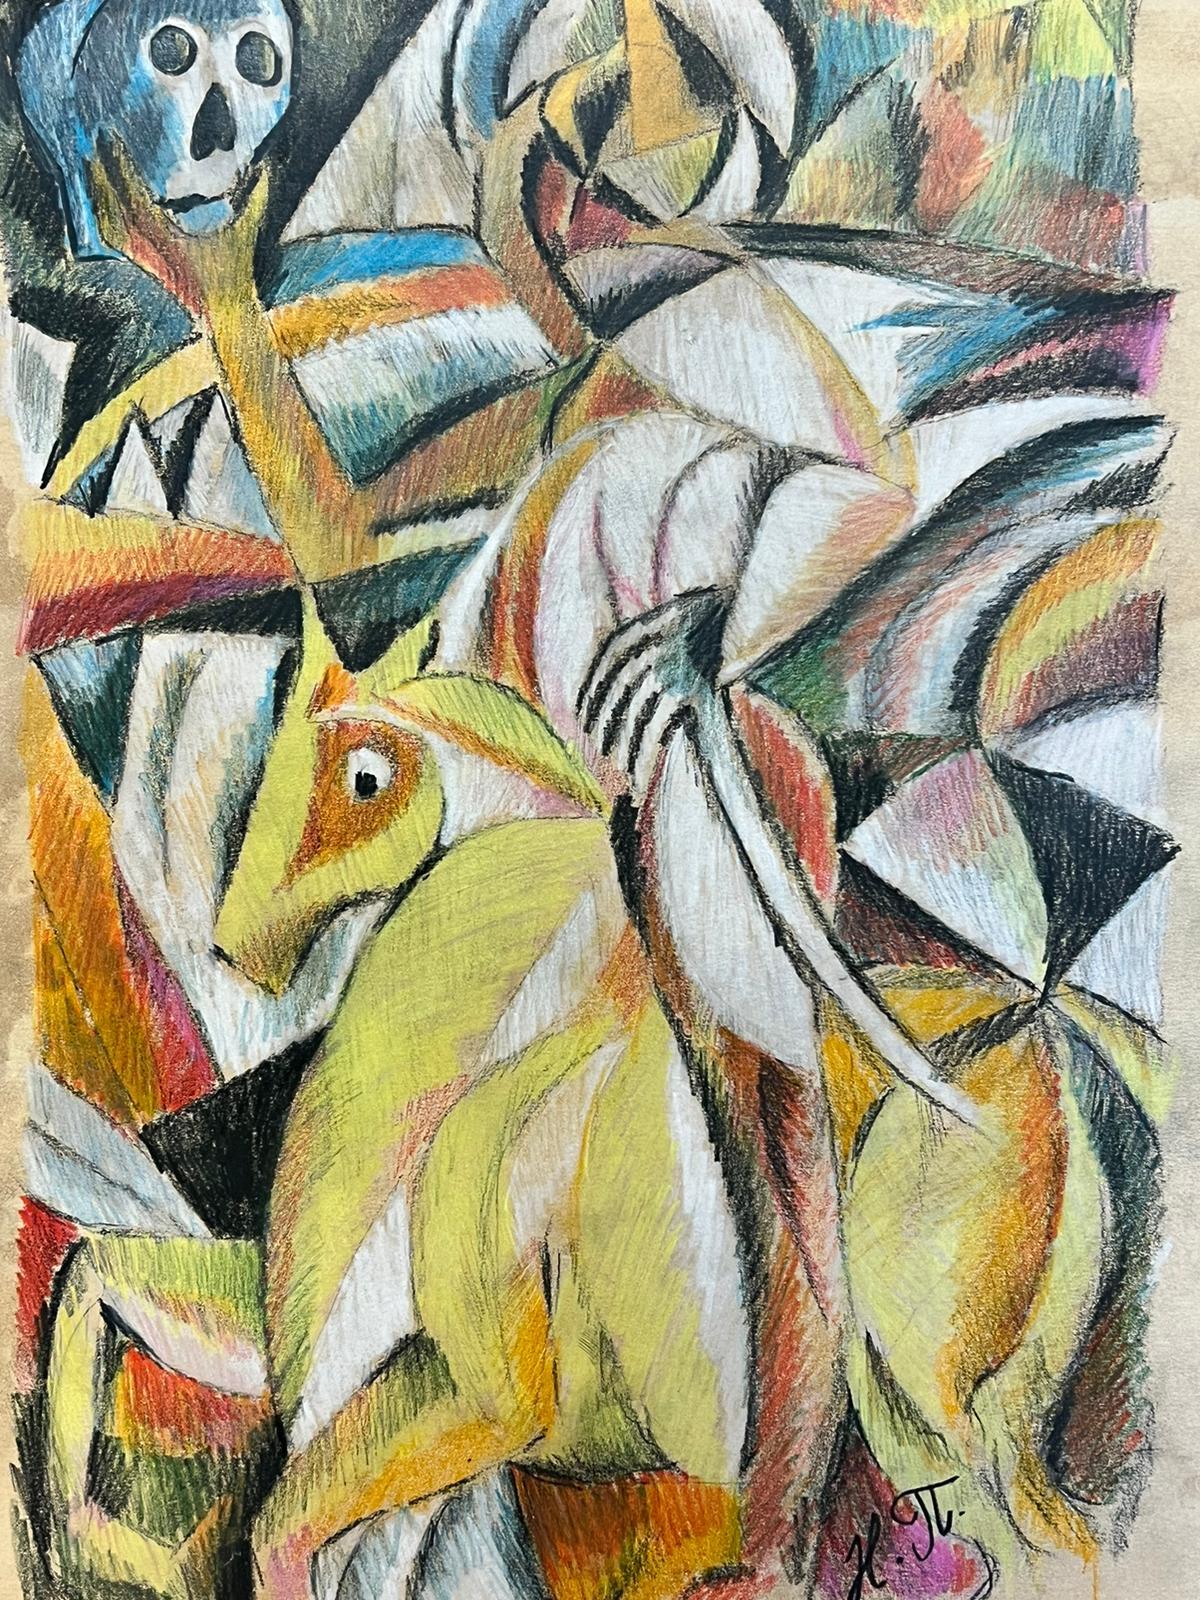 Cubist Scene
20th Century, Continental School
signed with initials
pastel painting on paper on board, framed
framed: 19 x 15 inches
painting: 16 x 12 inches
provenance: private collection, U. K.
condition: very good and sound condition 
